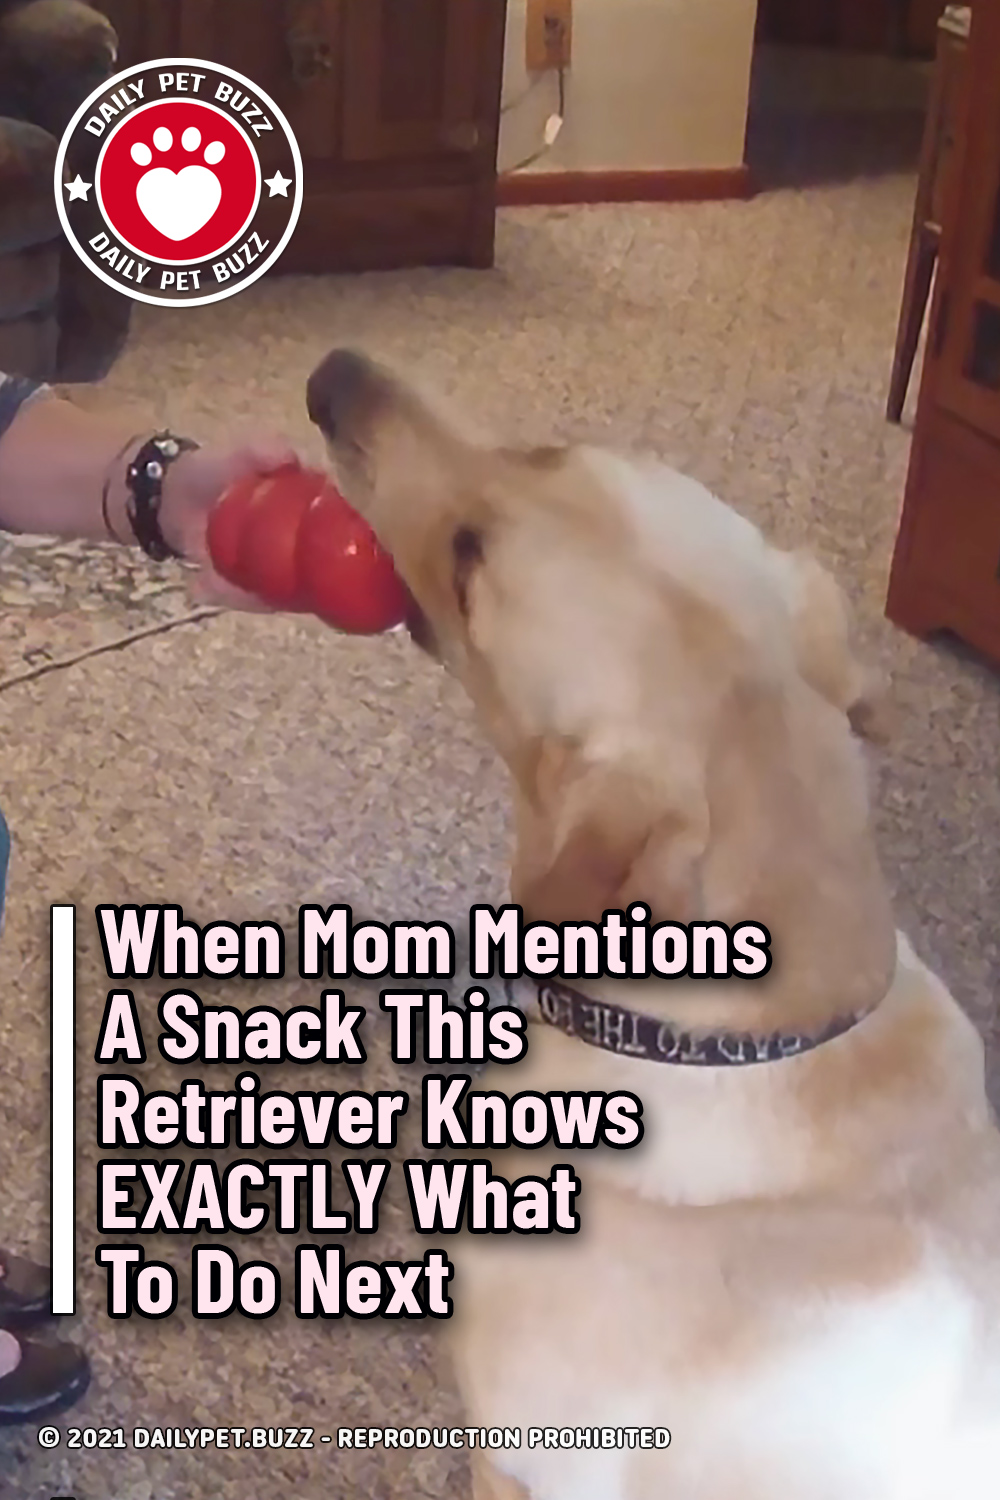 When Mom Mentions A Snack This Retriever Knows EXACTLY What To Do Next